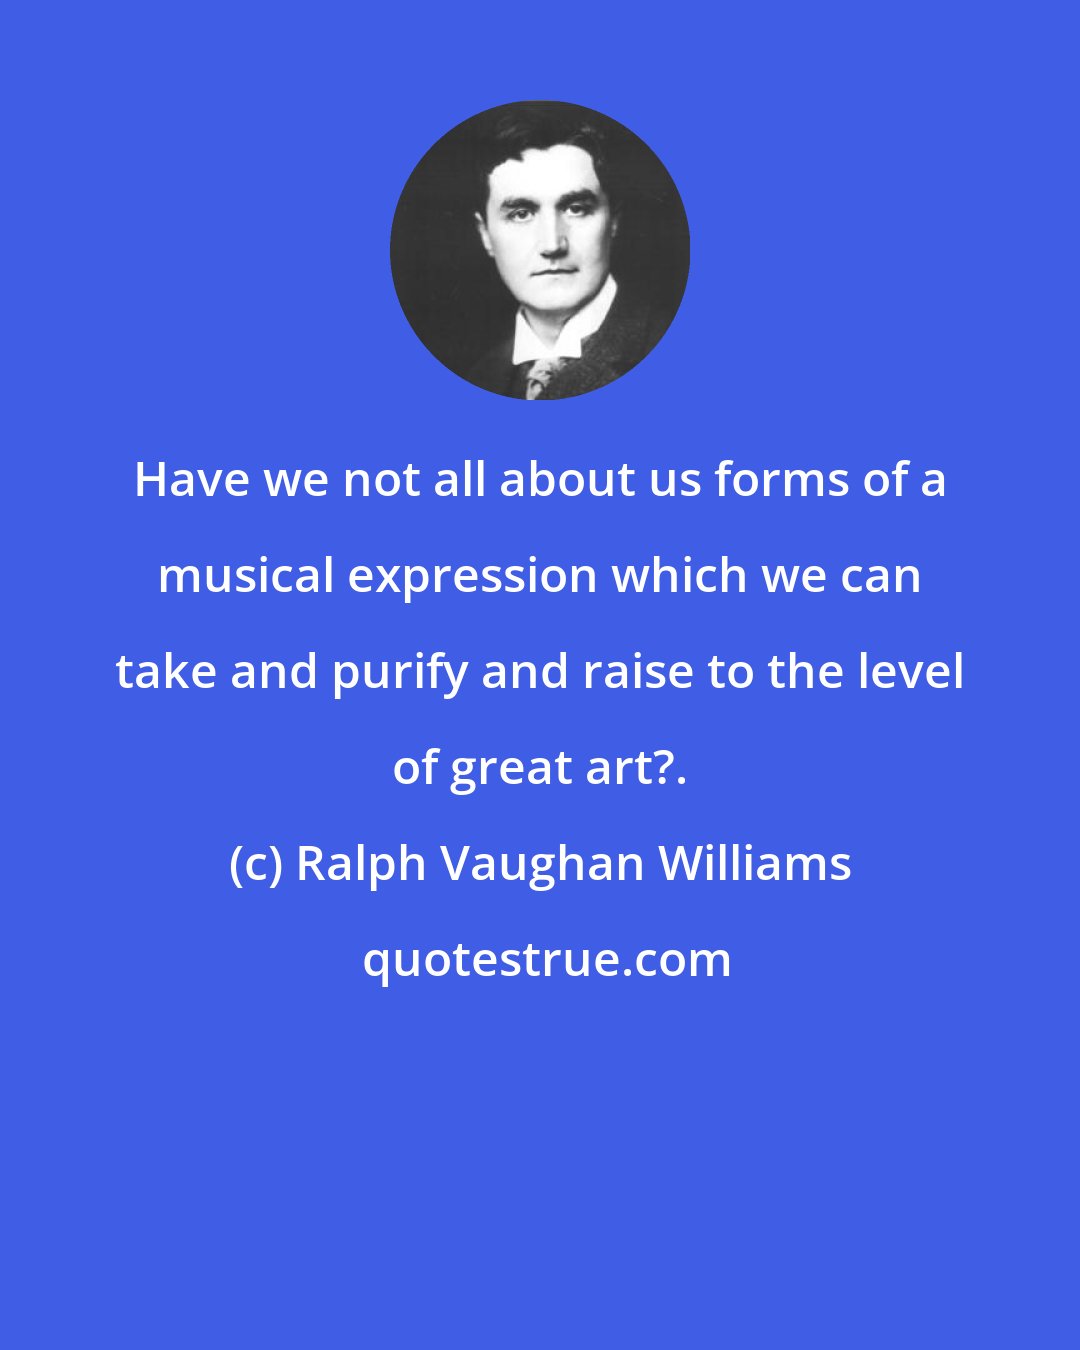 Ralph Vaughan Williams: Have we not all about us forms of a musical expression which we can take and purify and raise to the level of great art?.